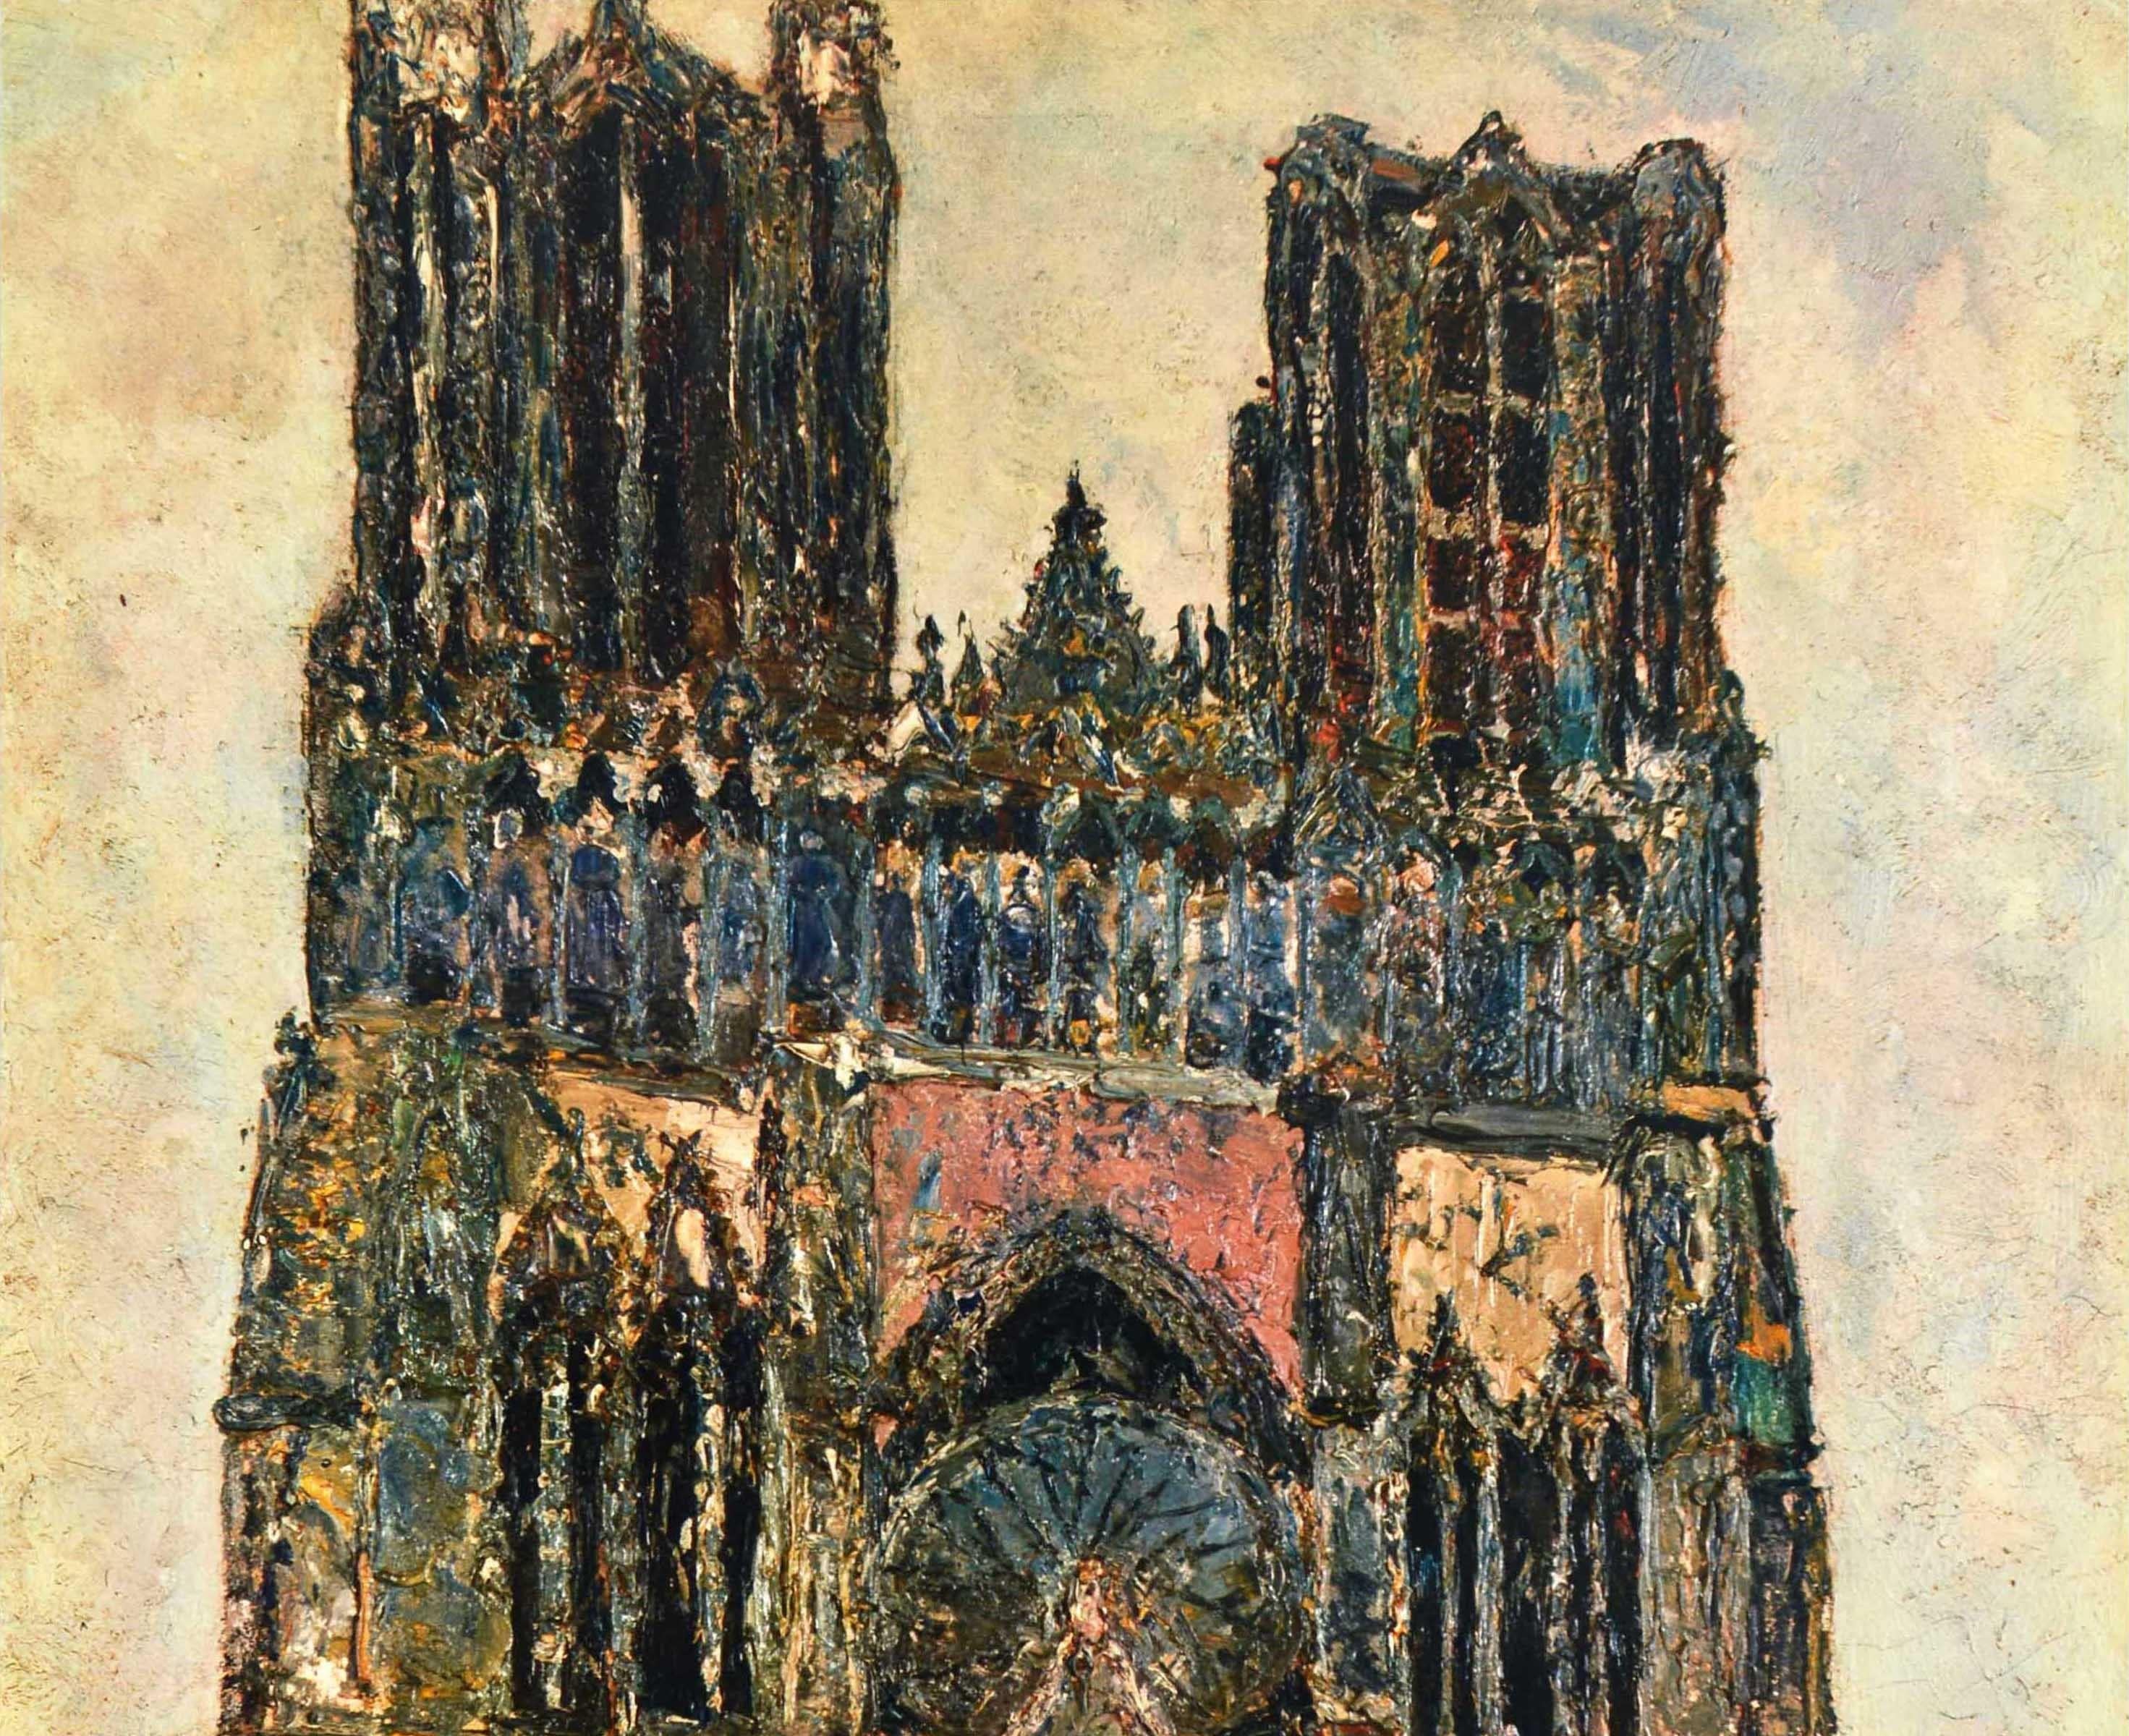 Original vintage travel poster for Reims featuring artwork by Maurice Utrillo (1883-1955) depicting The Cathedral of Reims / Le Cathedrale de Reims. Stunning painting of the historic Roman Catholic cathedral church showing people walking on the